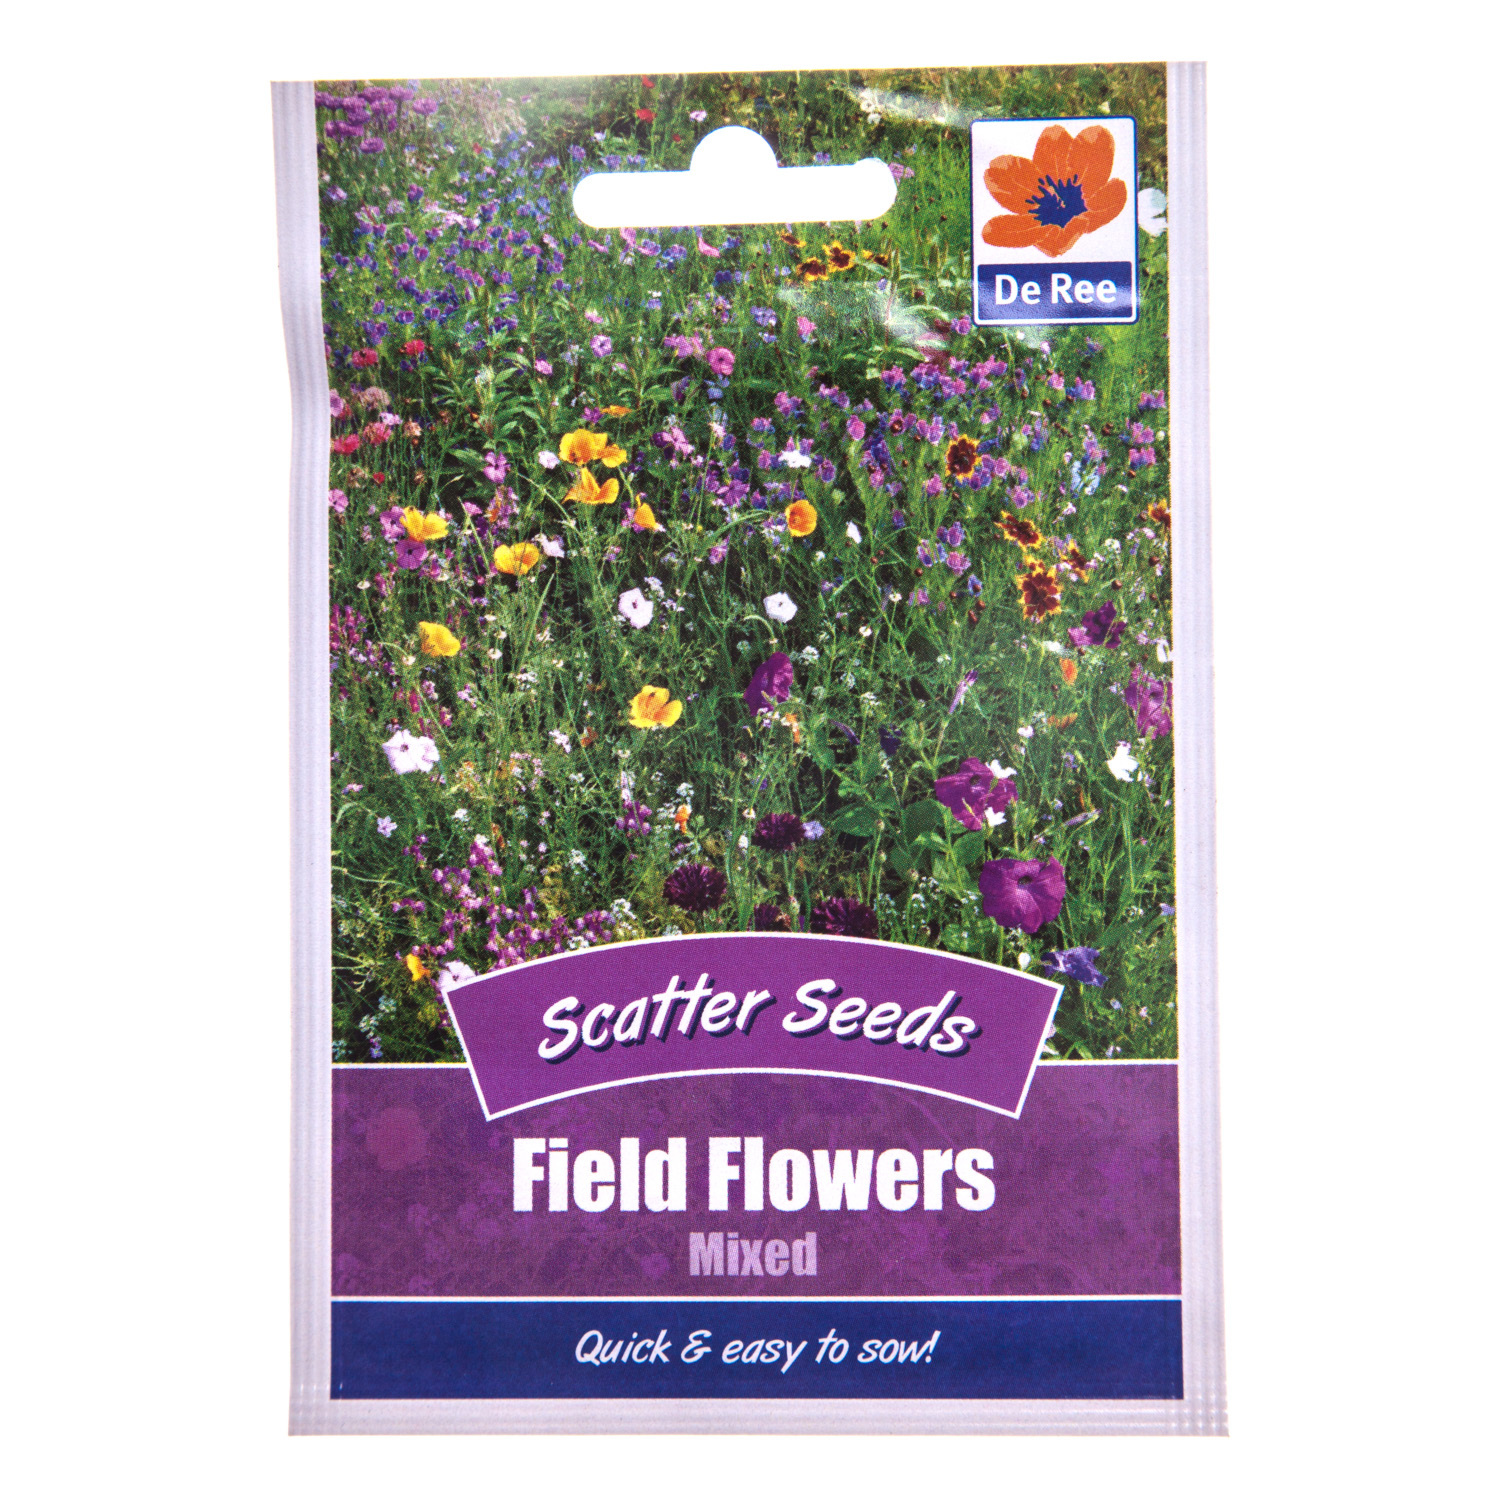 Mixed Field Flowers Scatter Seeds Image